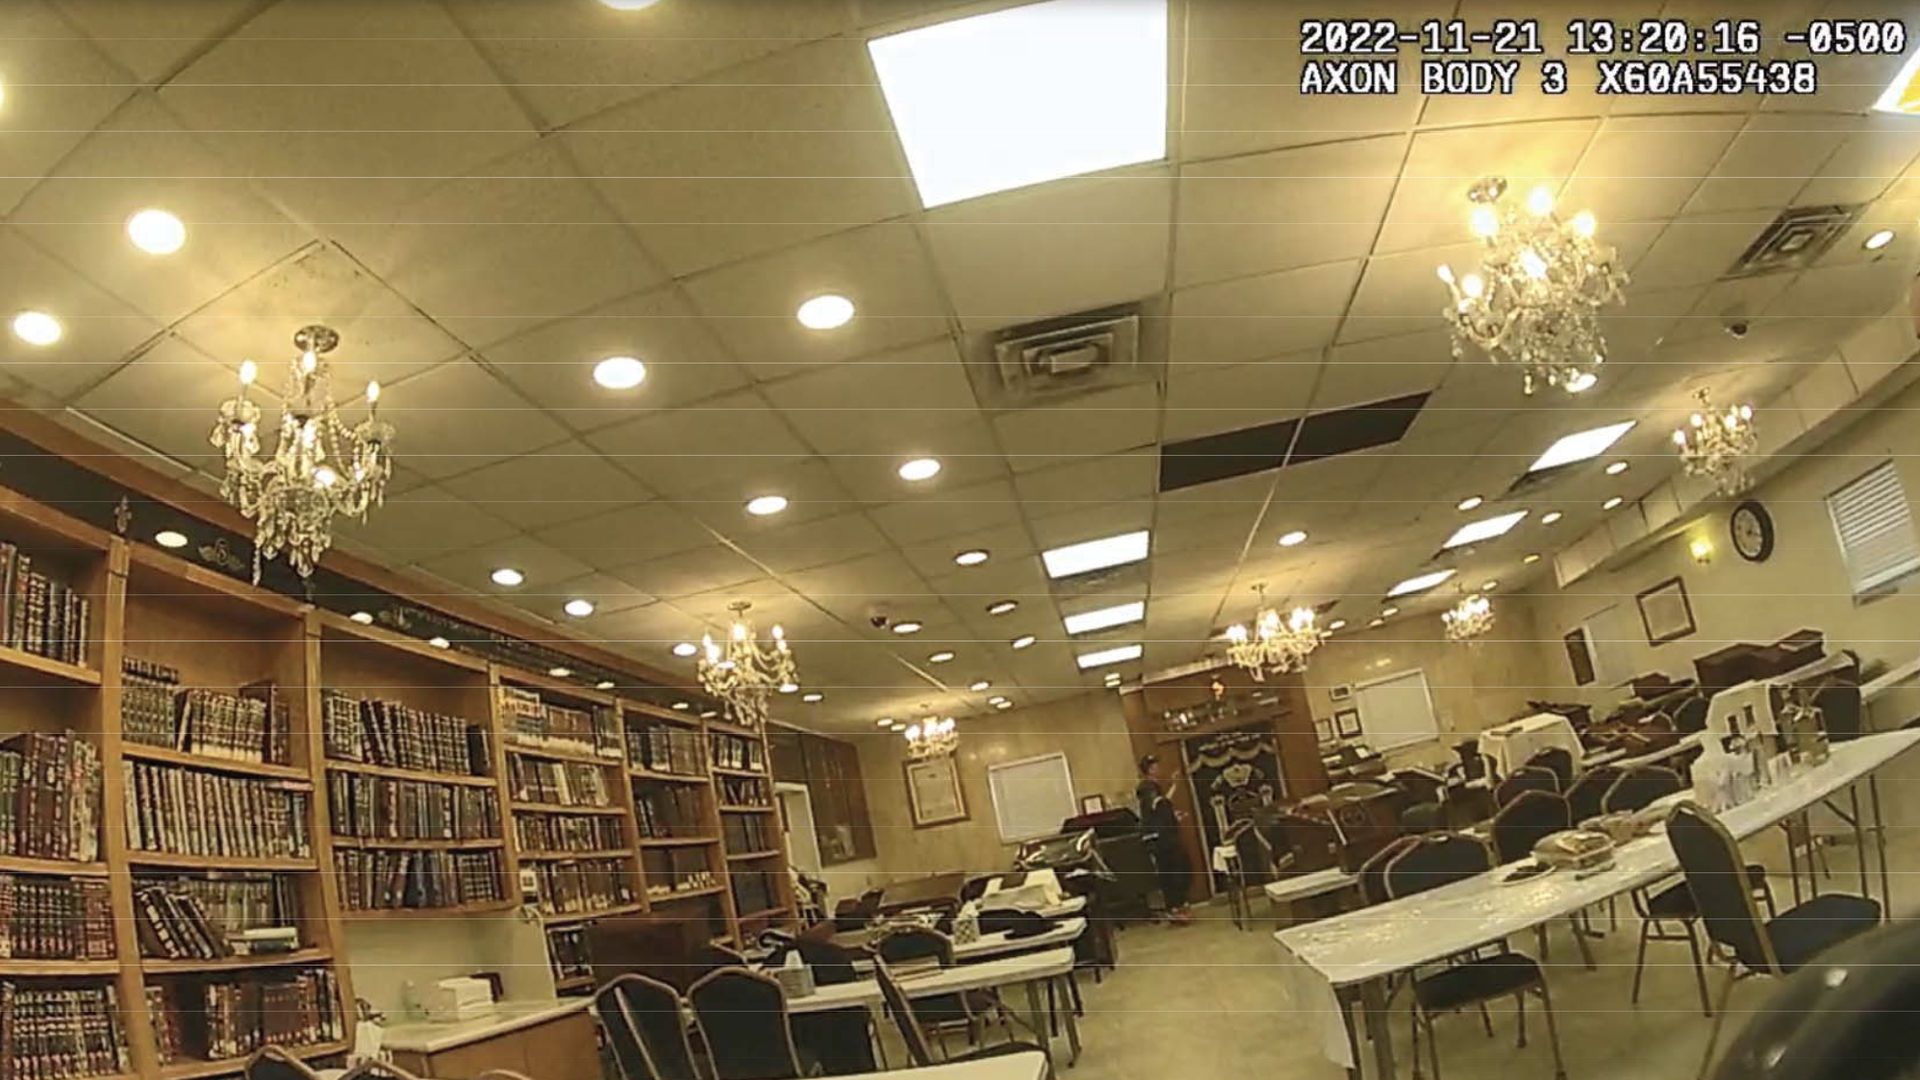 Bodycam footage shows a room with tables, chairs and bookshelves 